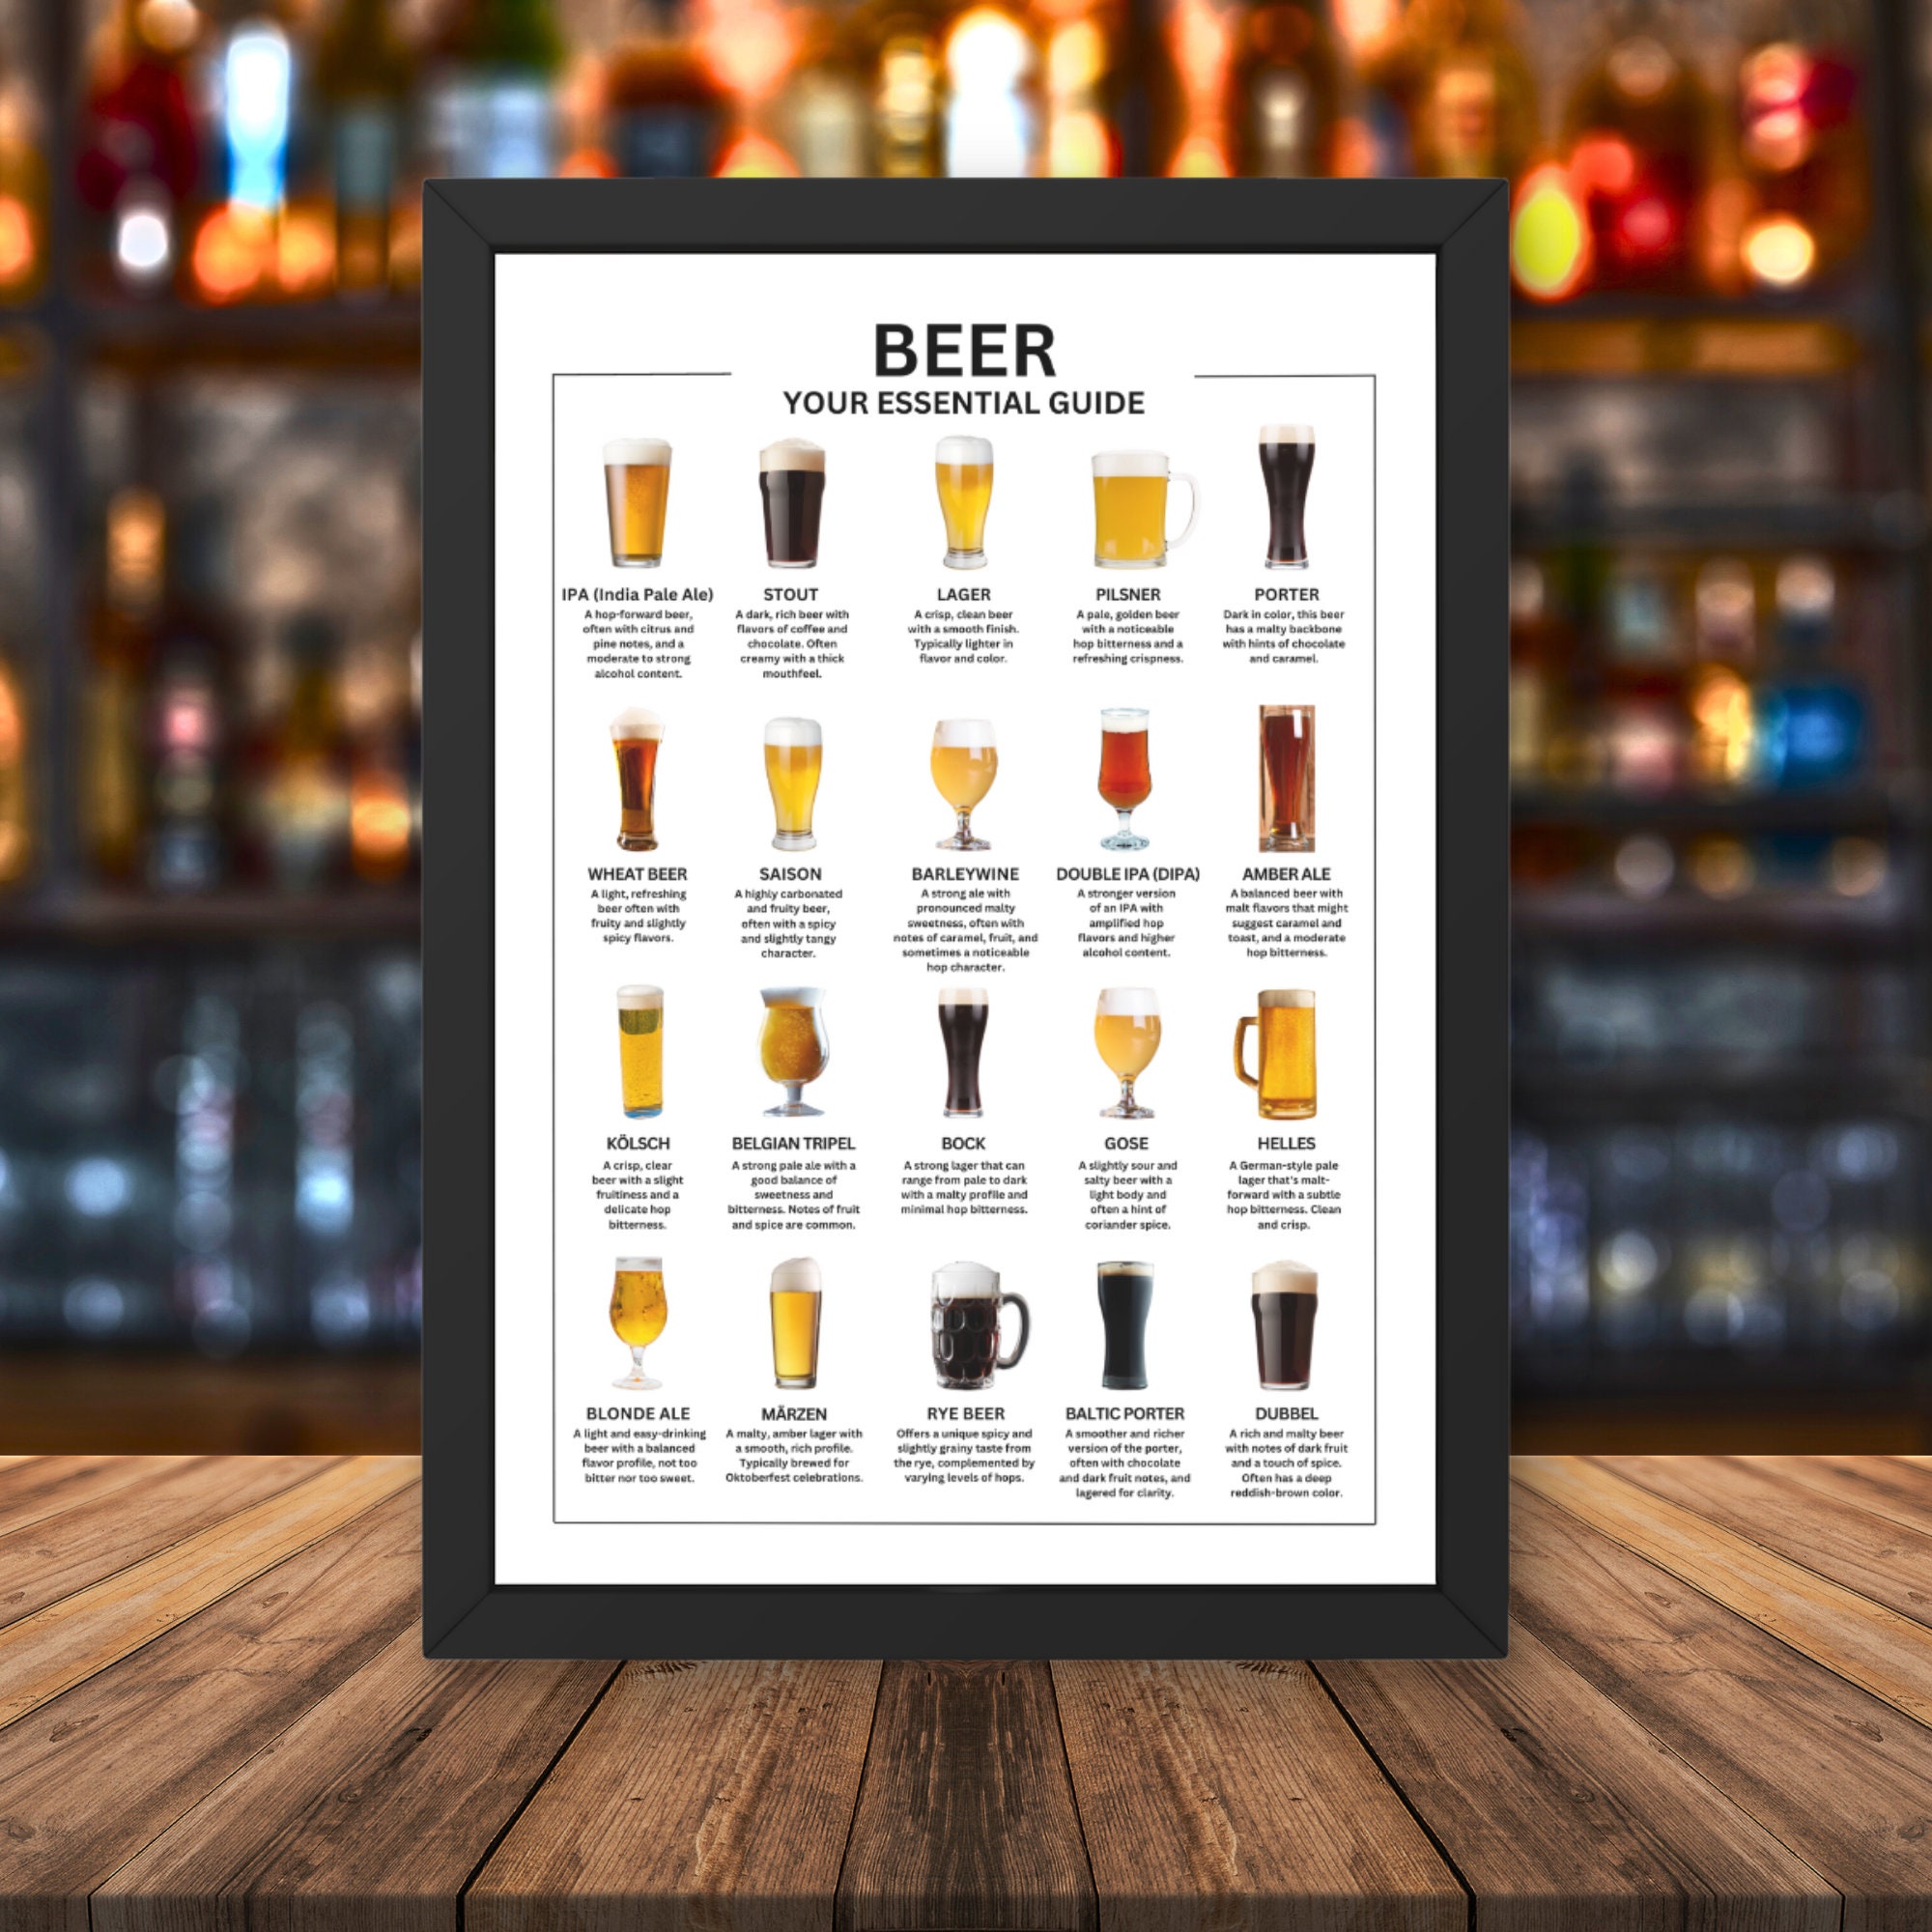 Types Of Beer Glasses And Styles Of Beer Reference Guide Chart Home Bar  Decor Pub Decor IPA Beer Mug Pint Glass Beer Sign Porter Stout Ale Beer  Stein